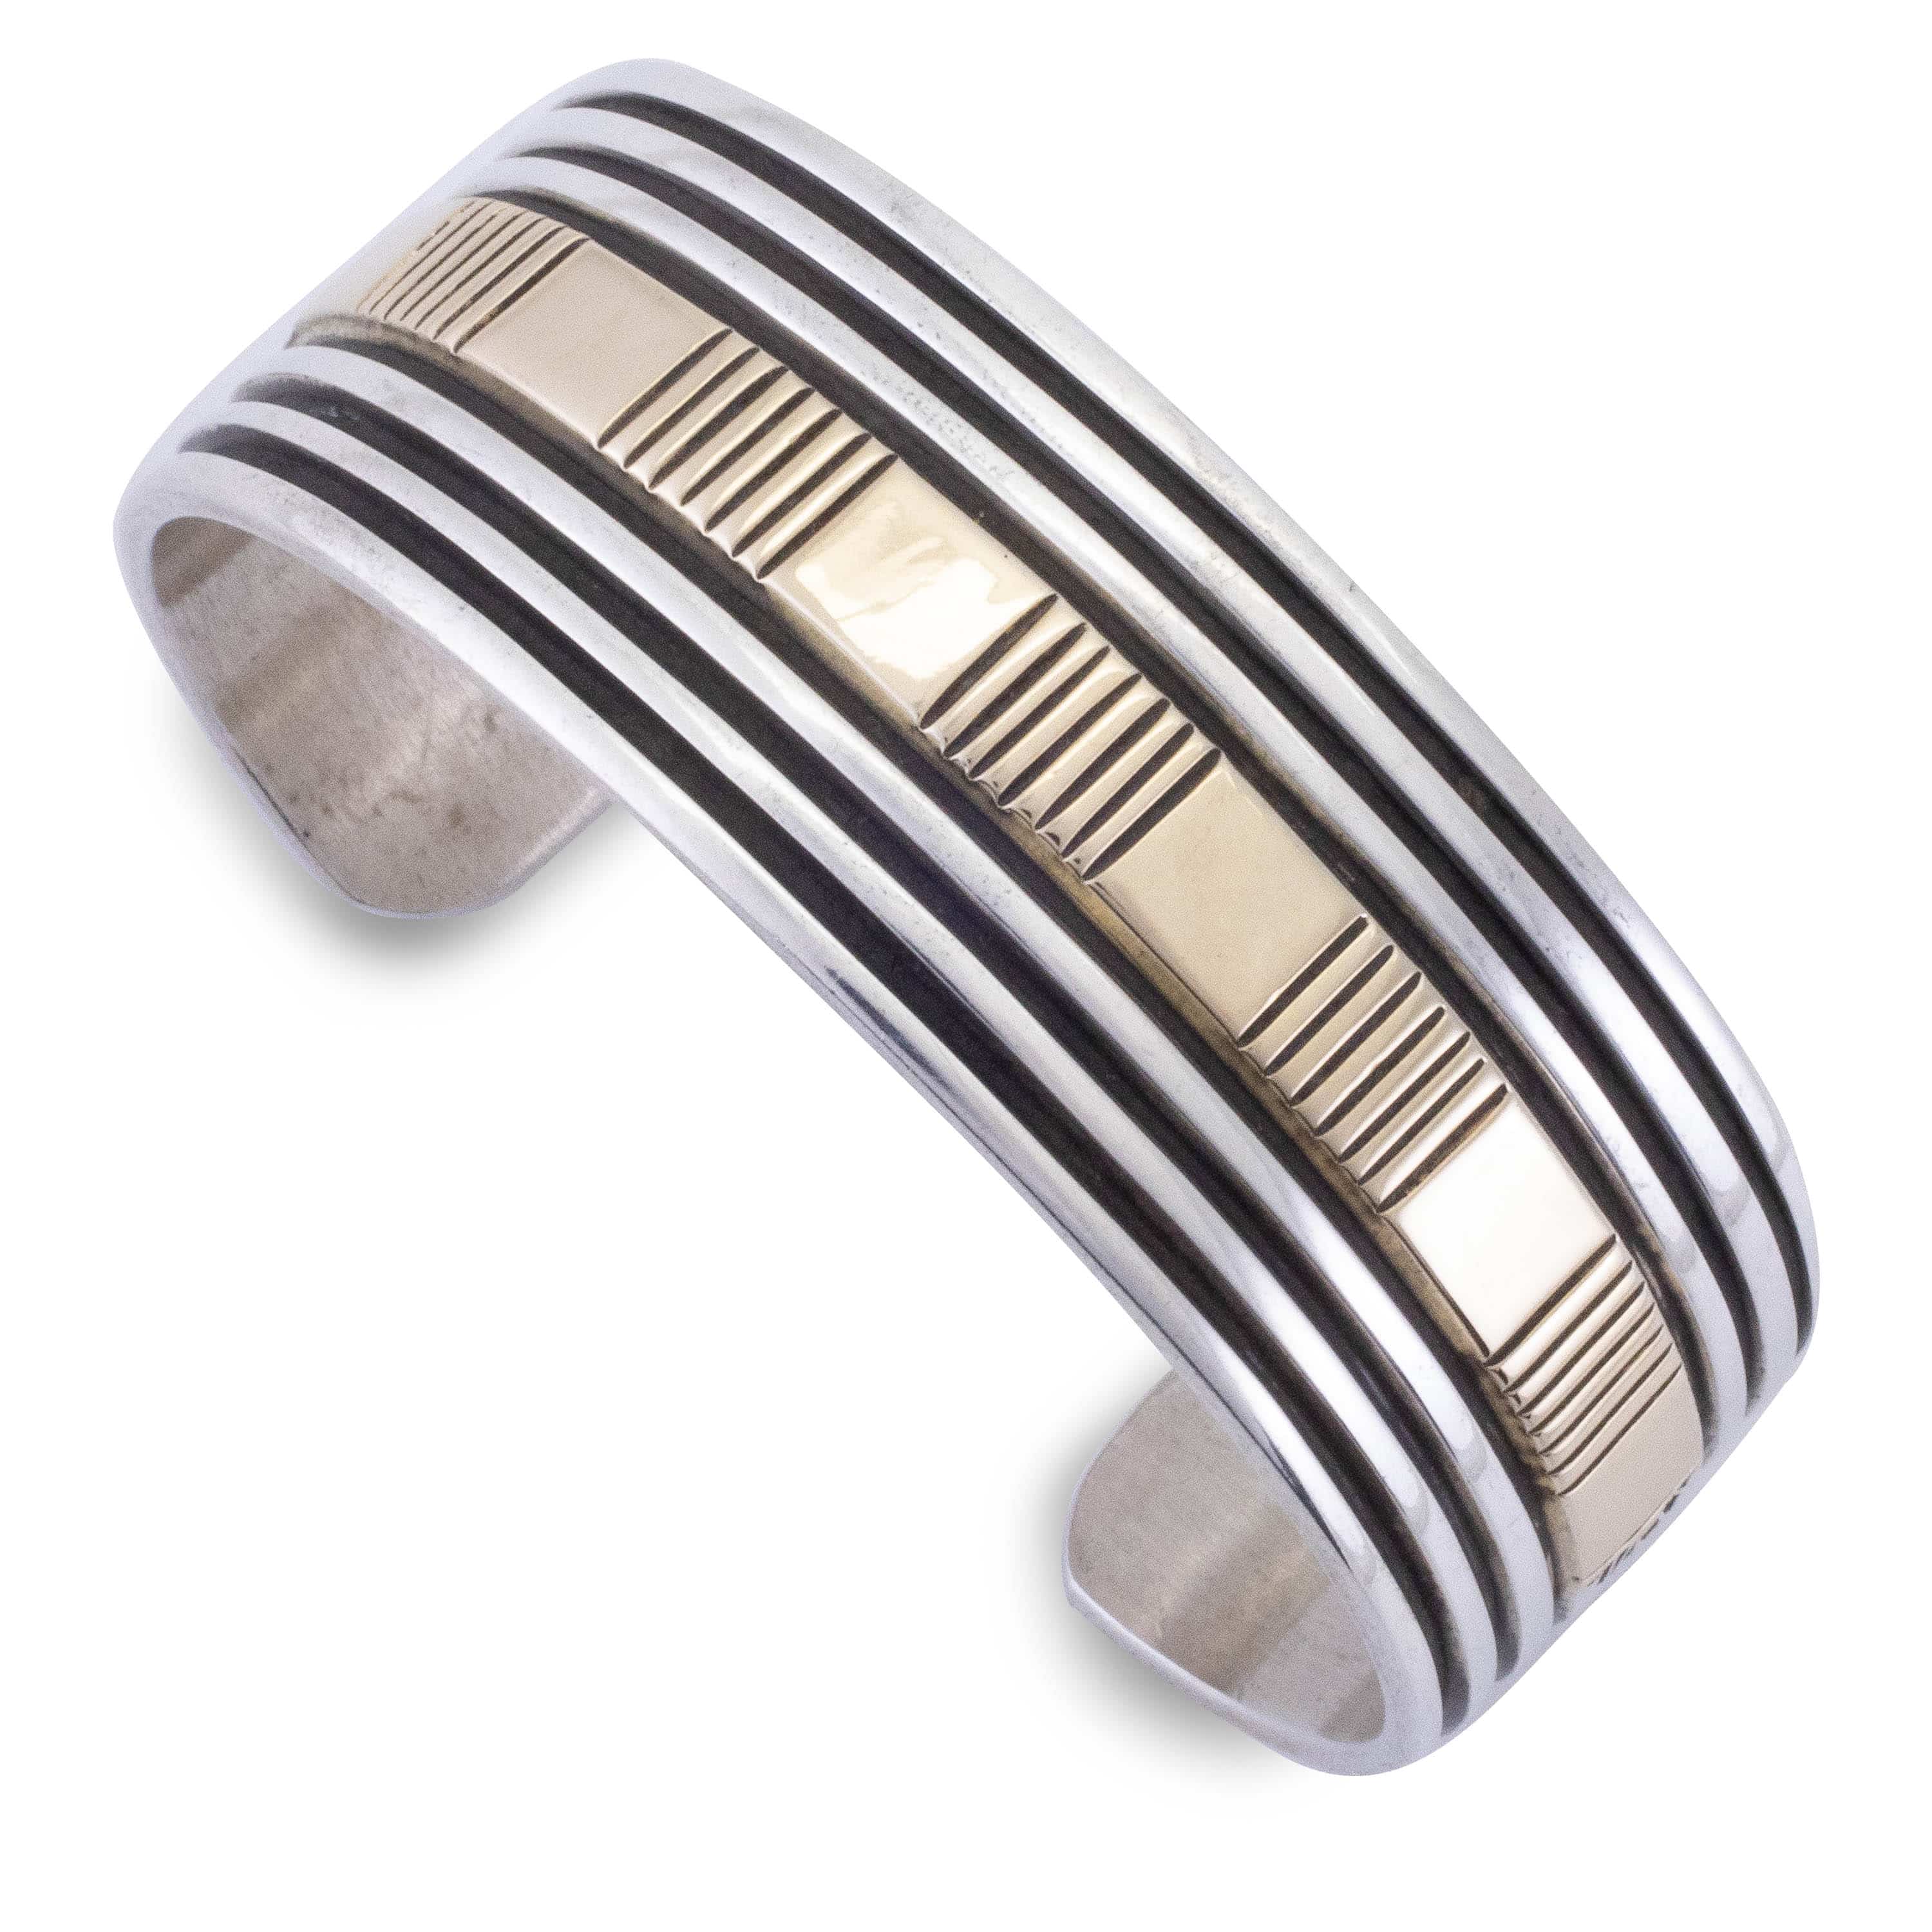 Bruce Morgan Navajo USA Native American Made 925 Sterling Silver Cuff with  14K Gold